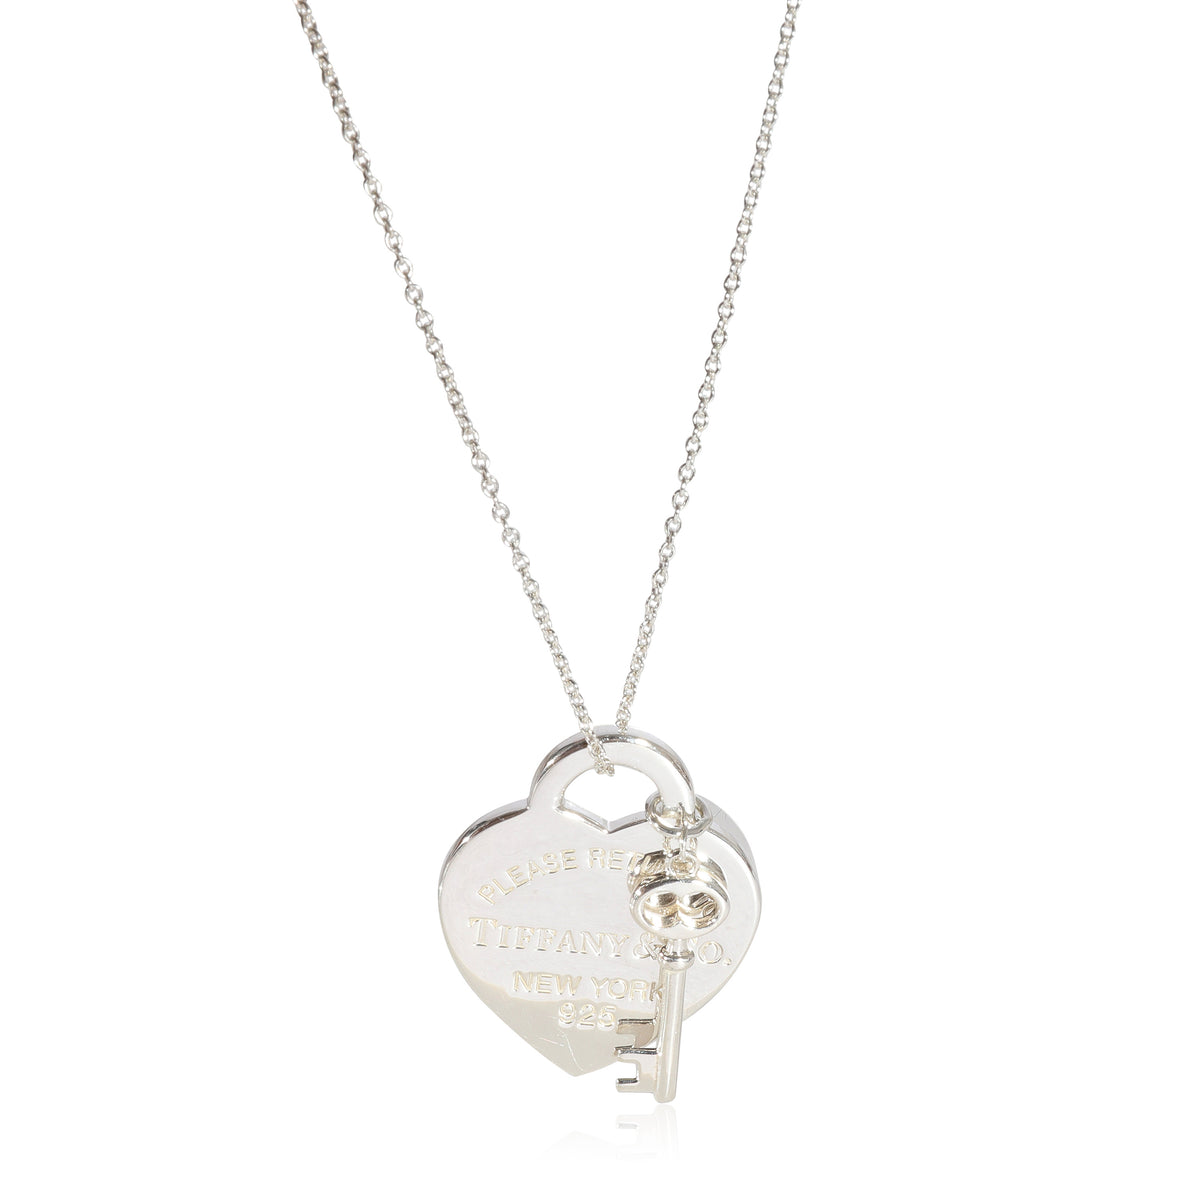 Return To Tiffany Heart Tag Necklace And Key in Sterling Silver